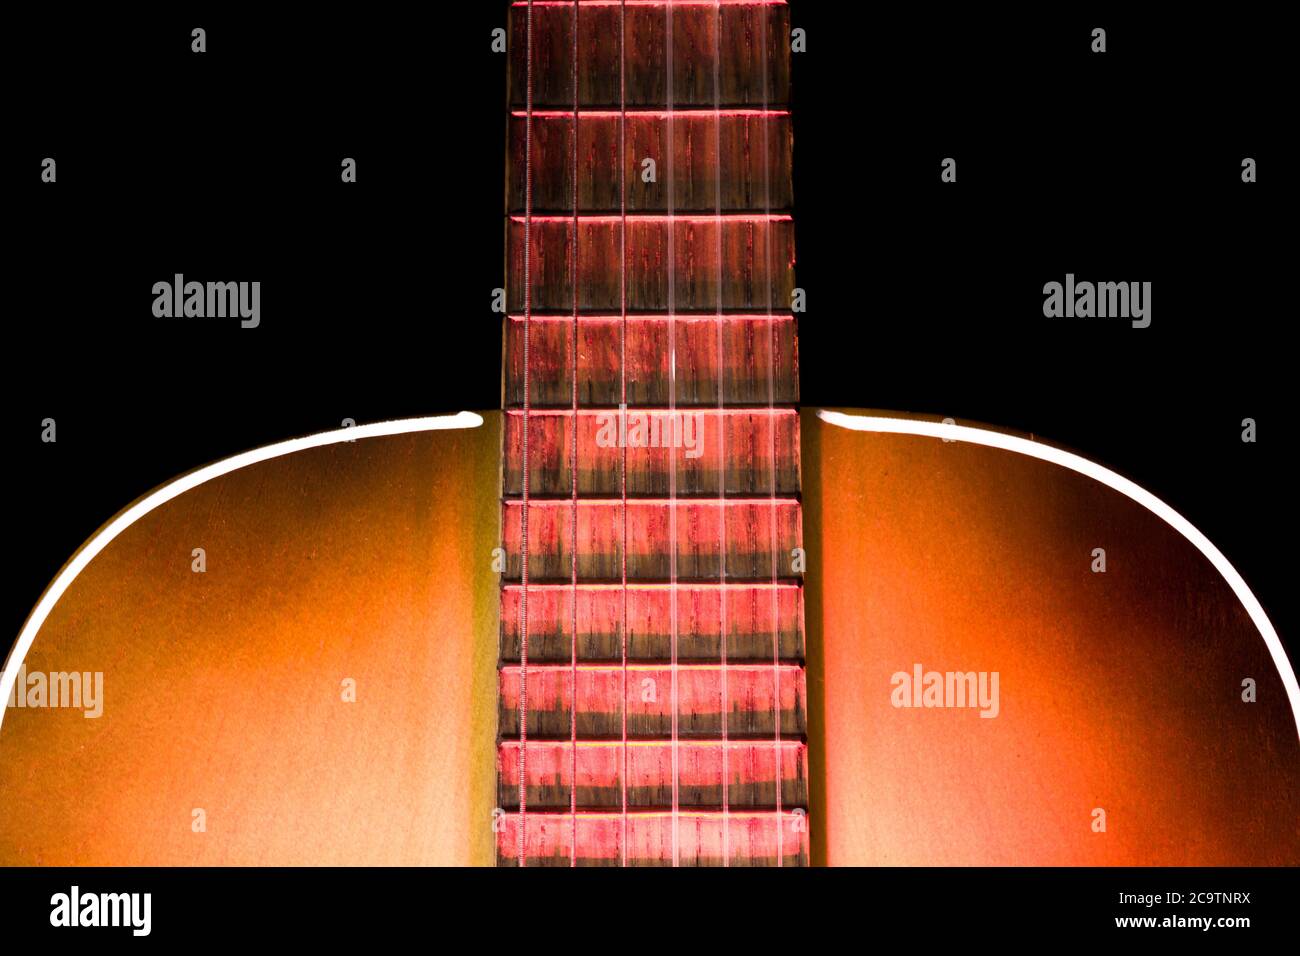 Acoustic guitar soundboard with part of the fretboard and illuminated with red light from below Stock Photo